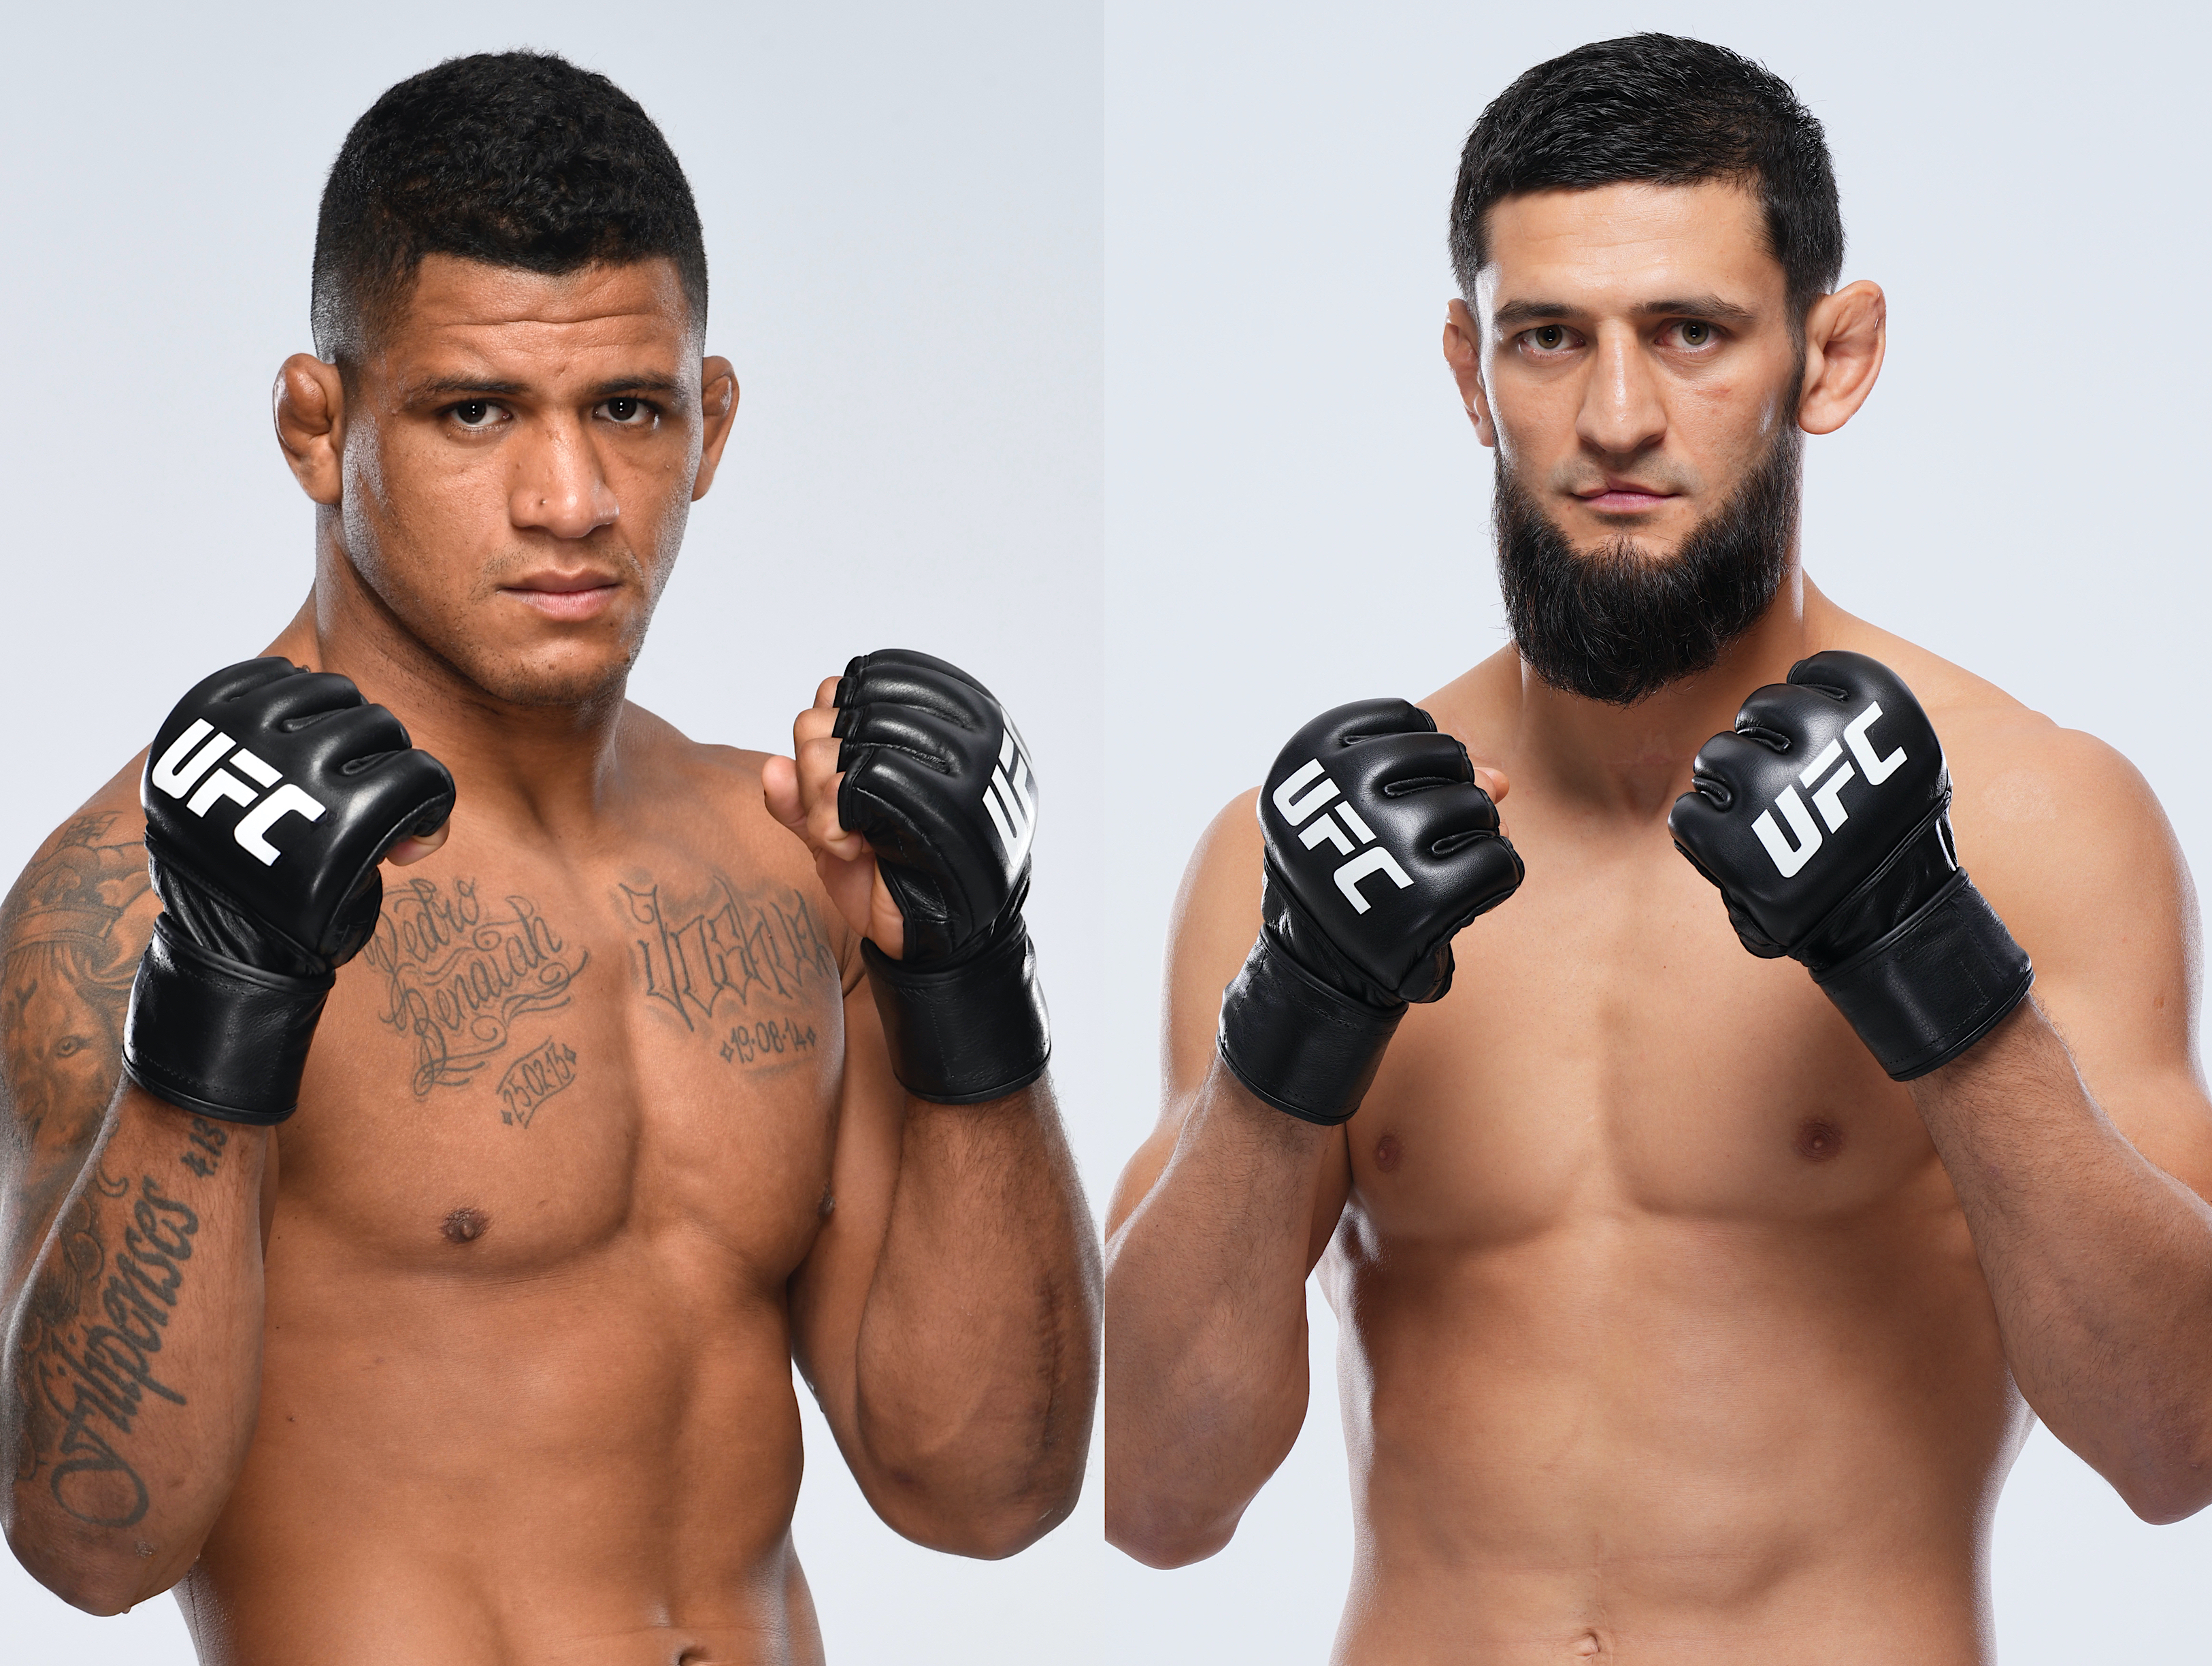 Khamzat Chimaev vs Gilbert Burns live stream; actual fight time, odds, UFC 273 card results, PPV cost, TV price